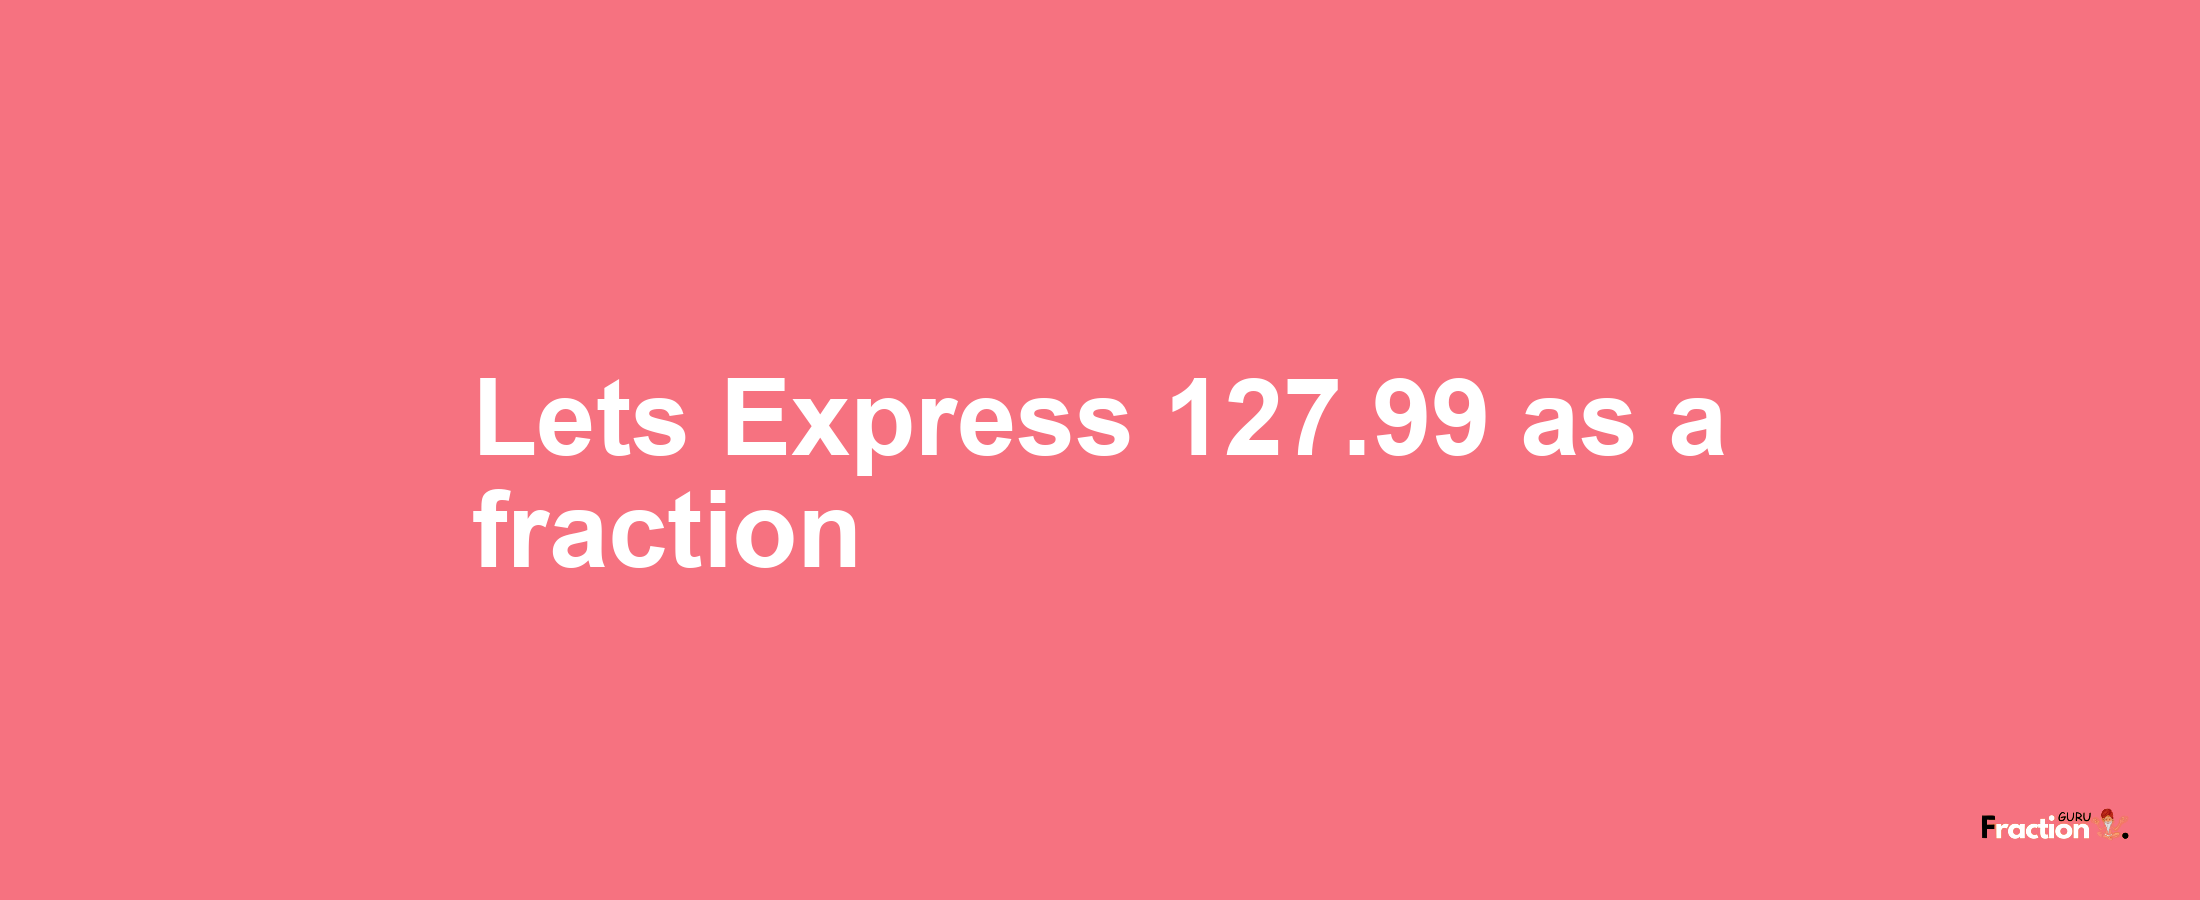 Lets Express 127.99 as afraction